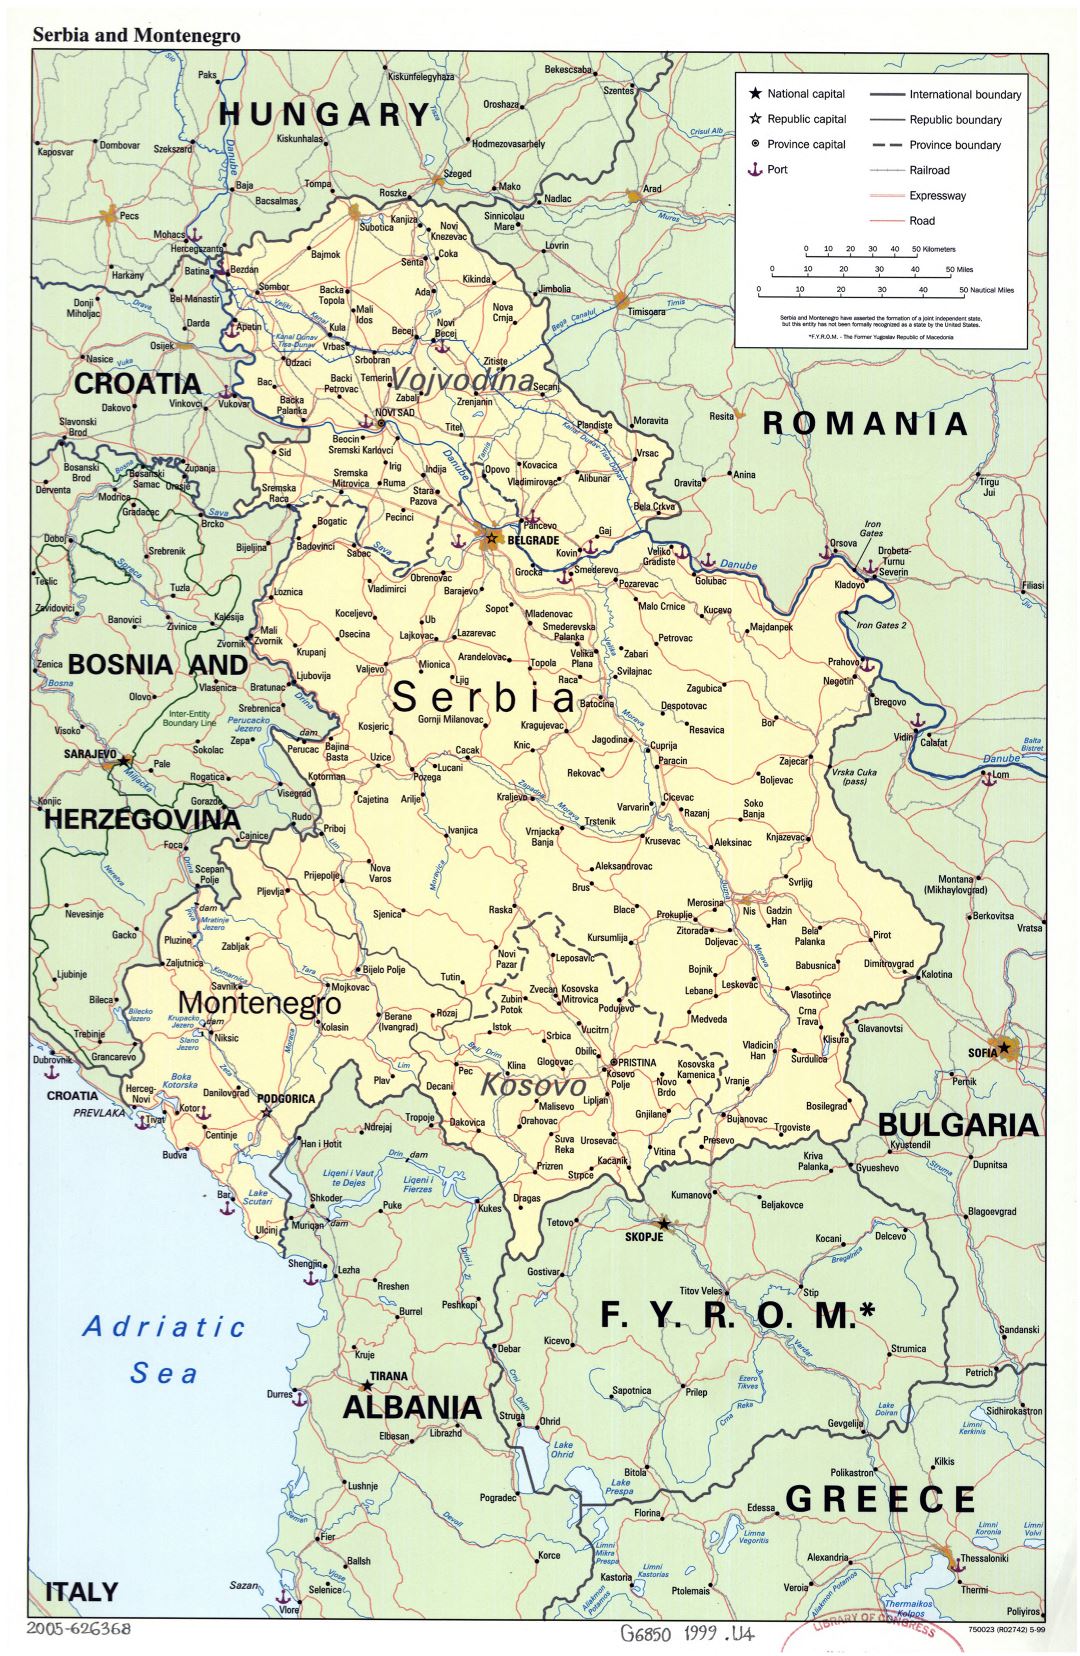 Large scale political map of Serbia, Montenegro and Kosovo with roads, railroads, ports and major cities - 1999